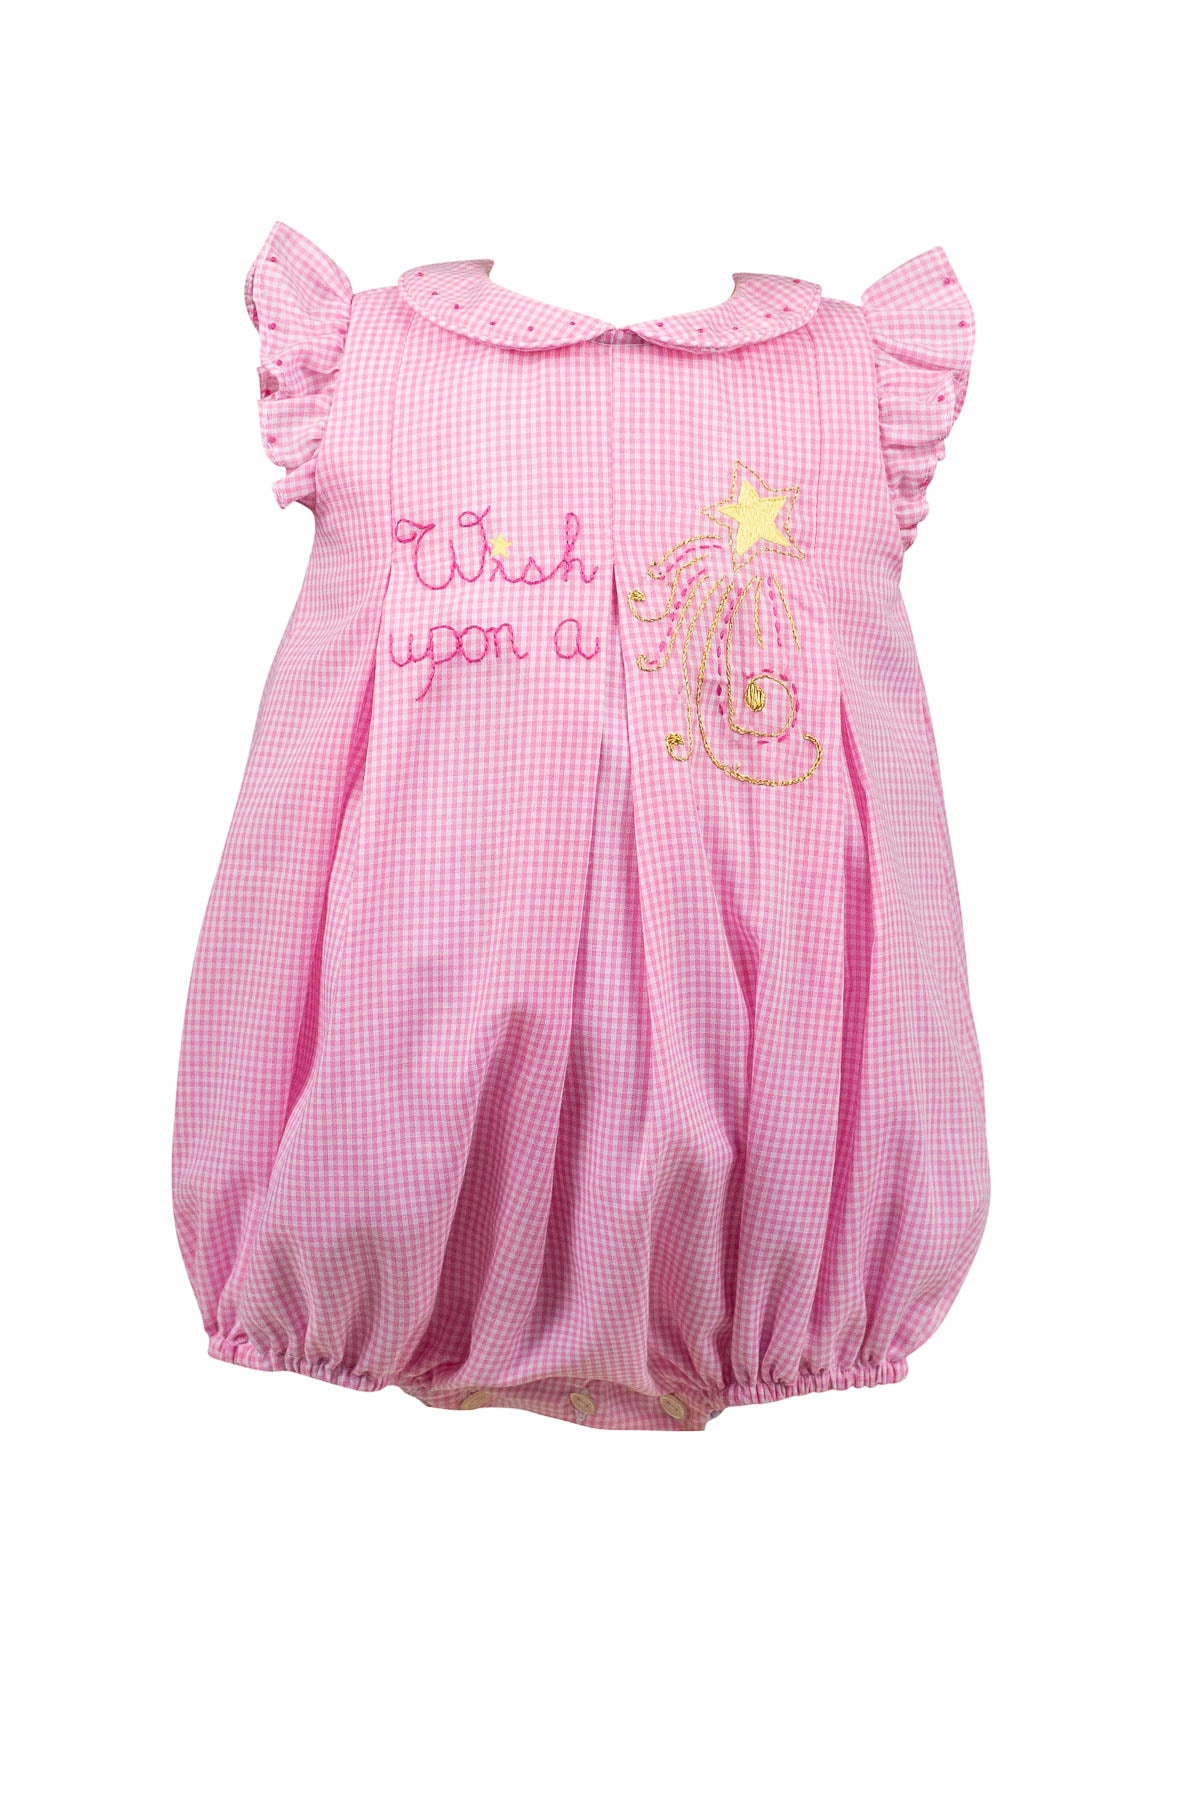 Wish Upon A Star Girl Bubble (12M,18M,24M)